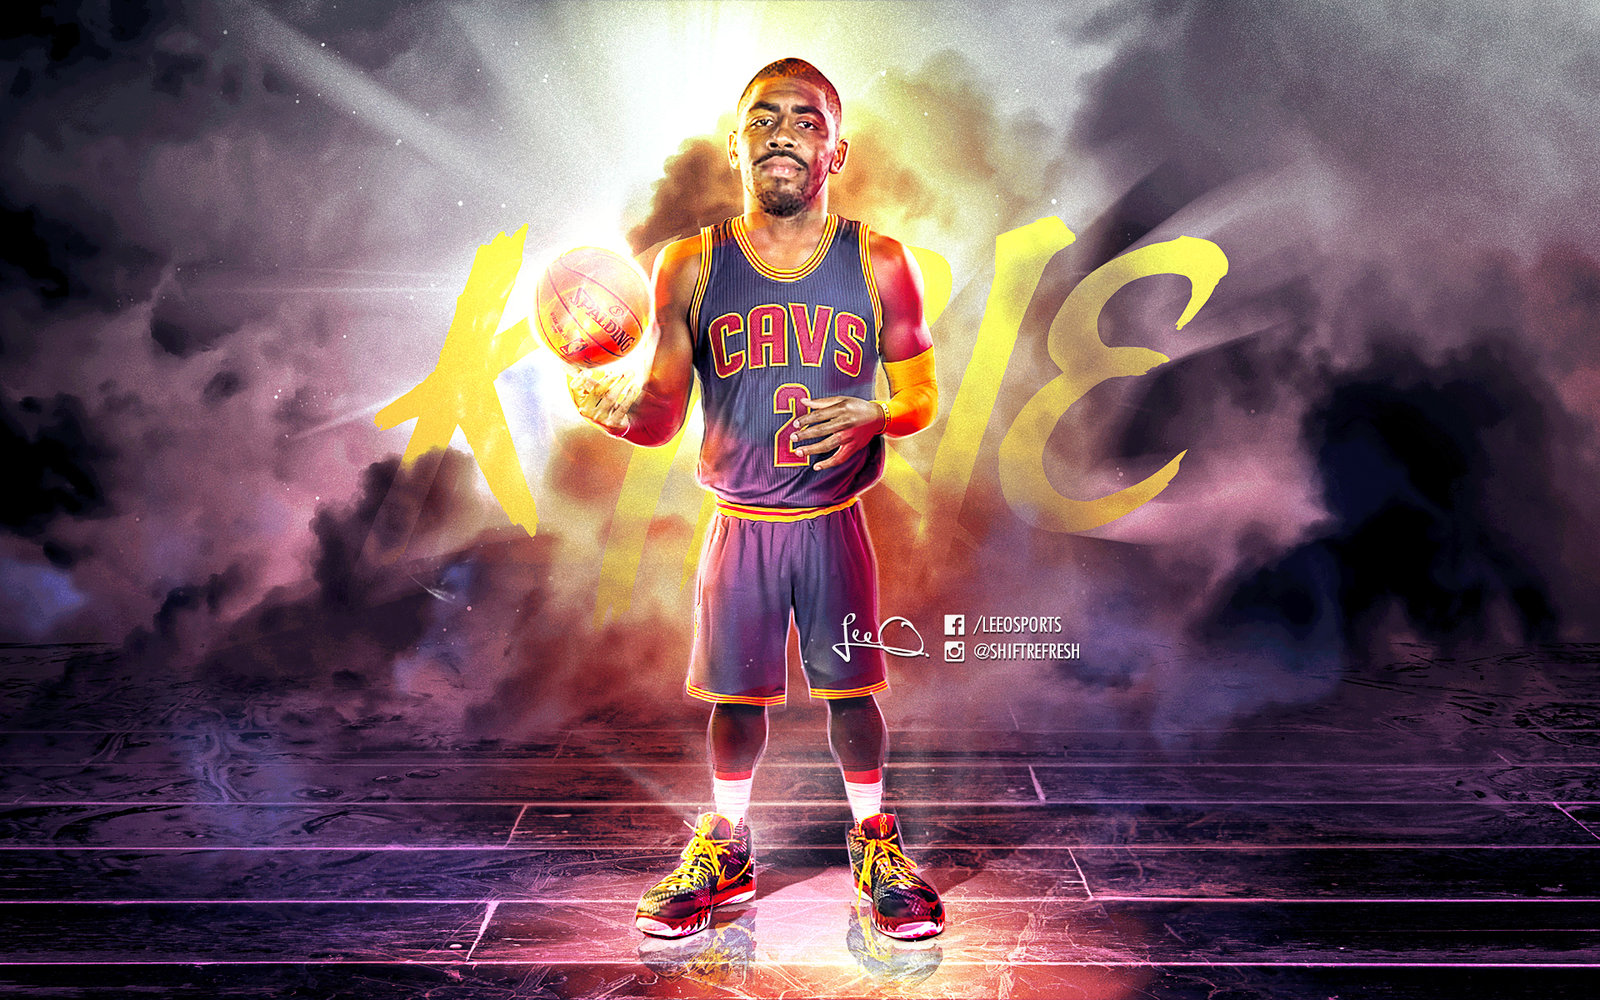 Kyrie Irving NBA Wallpaper by skythlee on